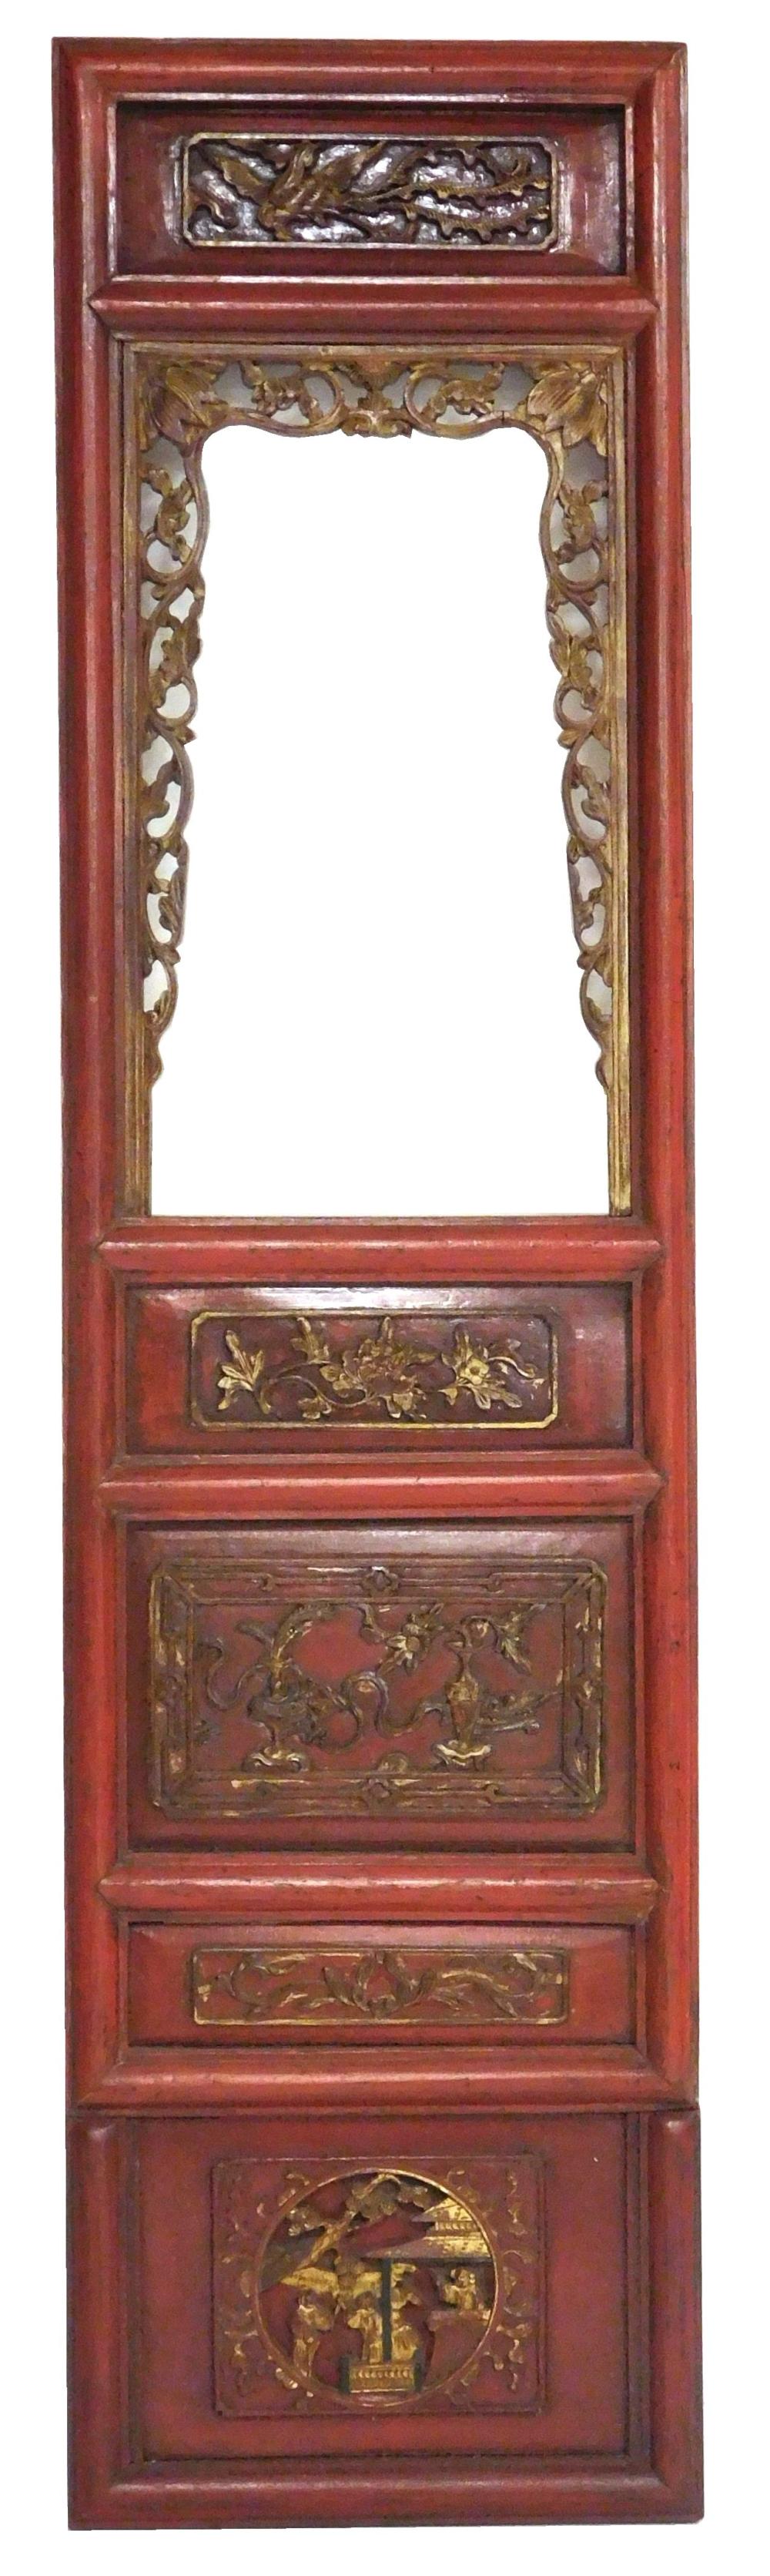 ASIAN CHINESE CARVED WINDOW PANEL  31e720